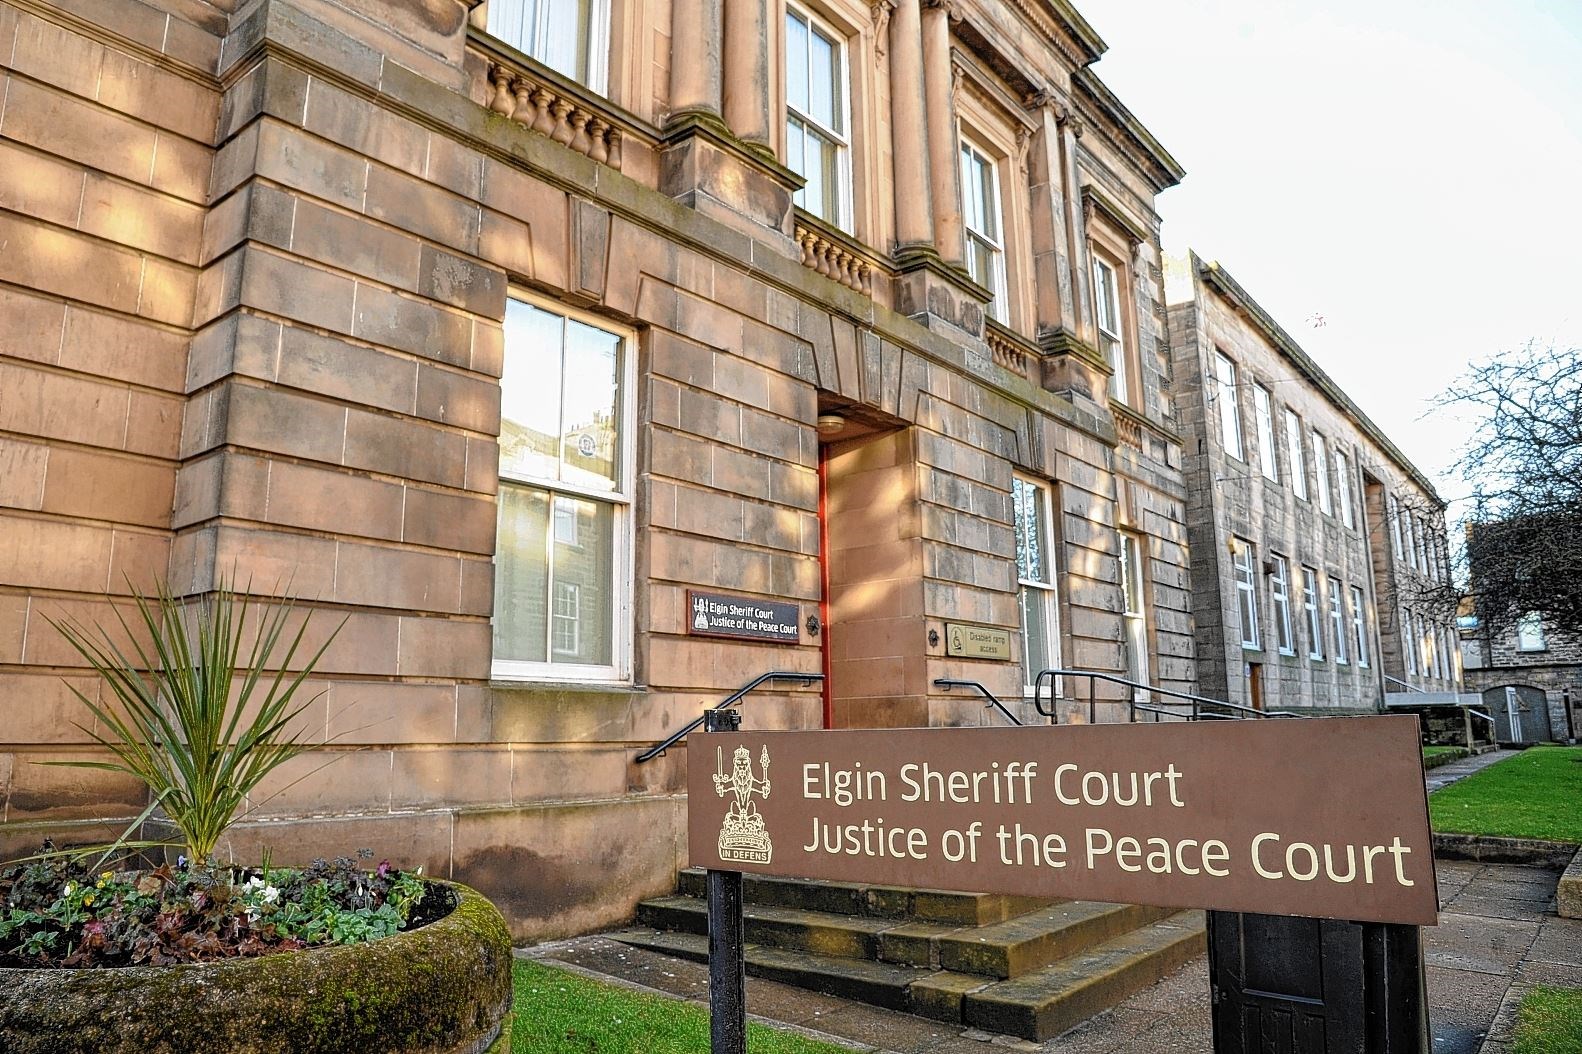 Sutherland was sentenced at Elgin Sheriff Court on Thursday (October 20).